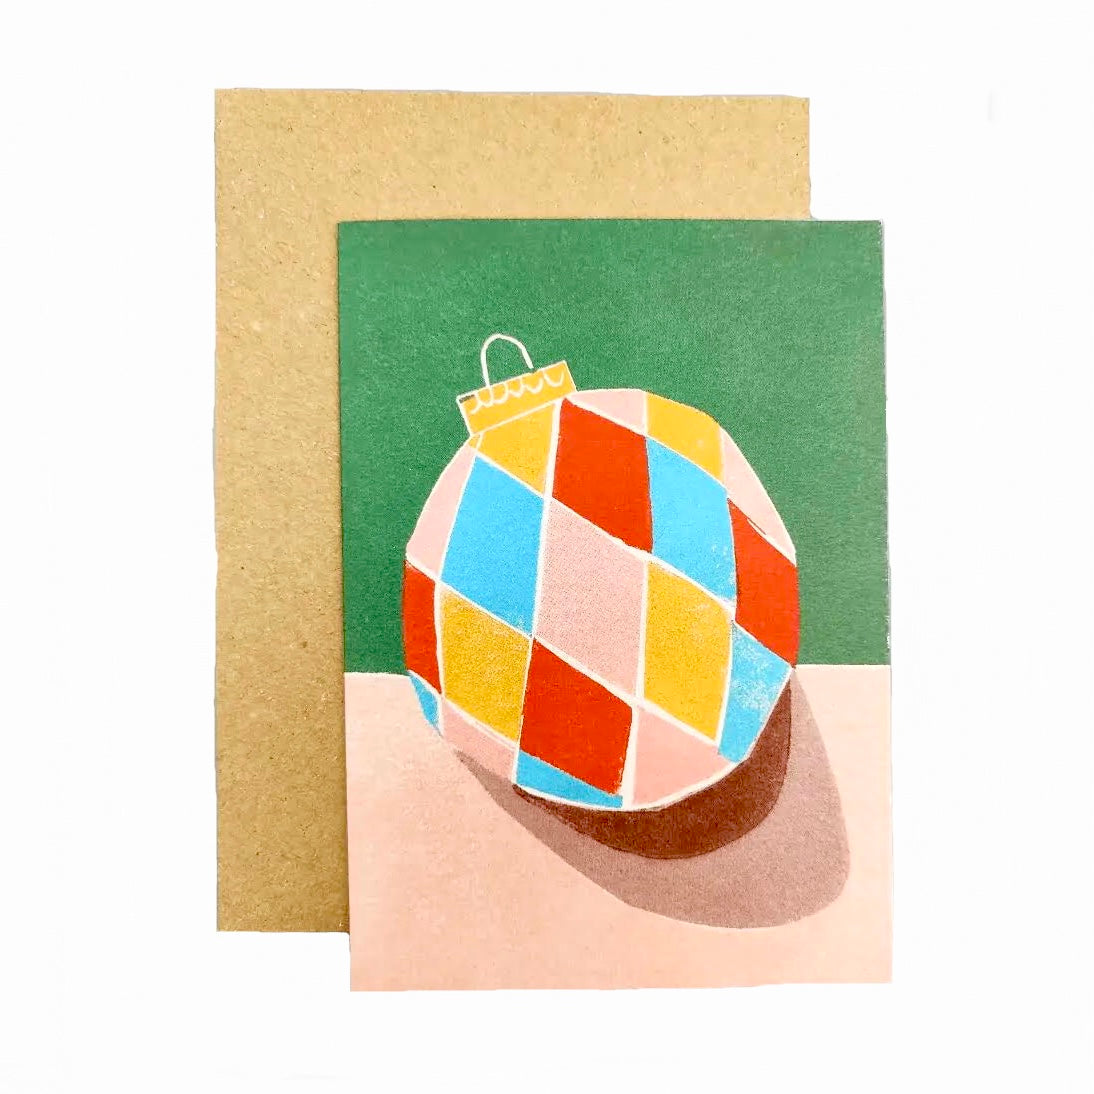 Harlequin Bauble Card - The Bristol Artisan Handmade Sustainable Gifts and Homewares.